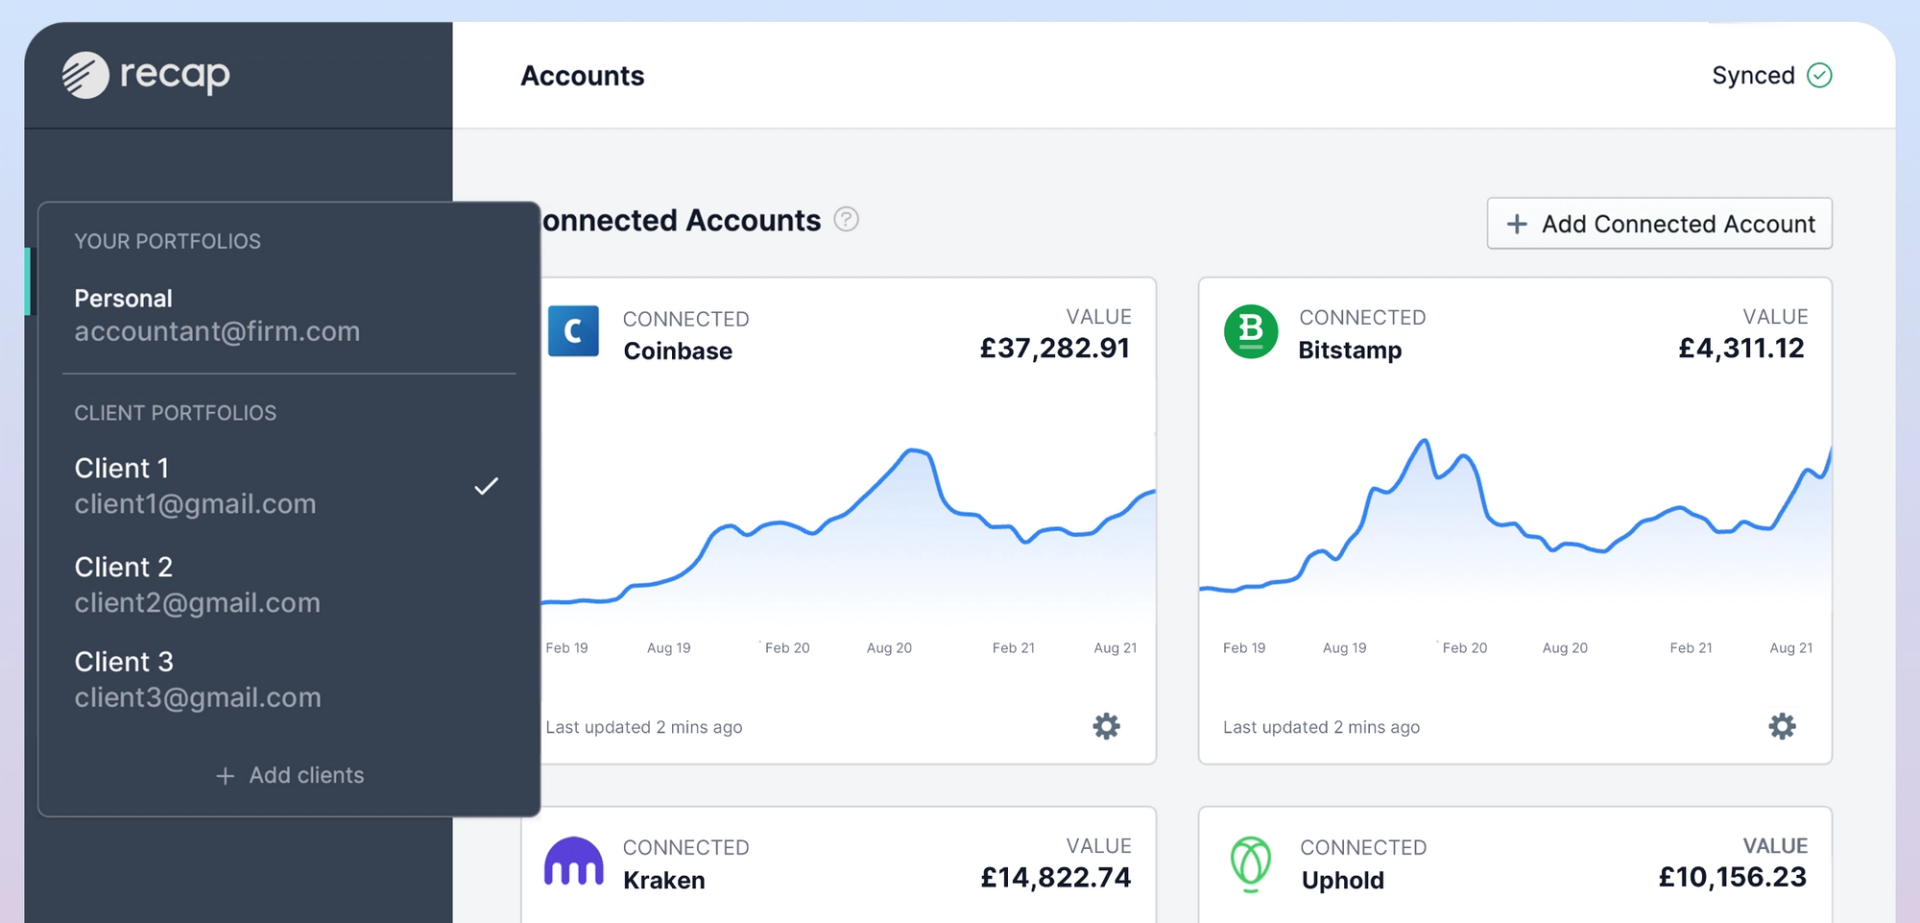 A screenshot of the Recap accountant portal. Client 1's portfolio is selected and there is a view of connected accounts - Coinbase, Bitstamp, Kraken and Uphold